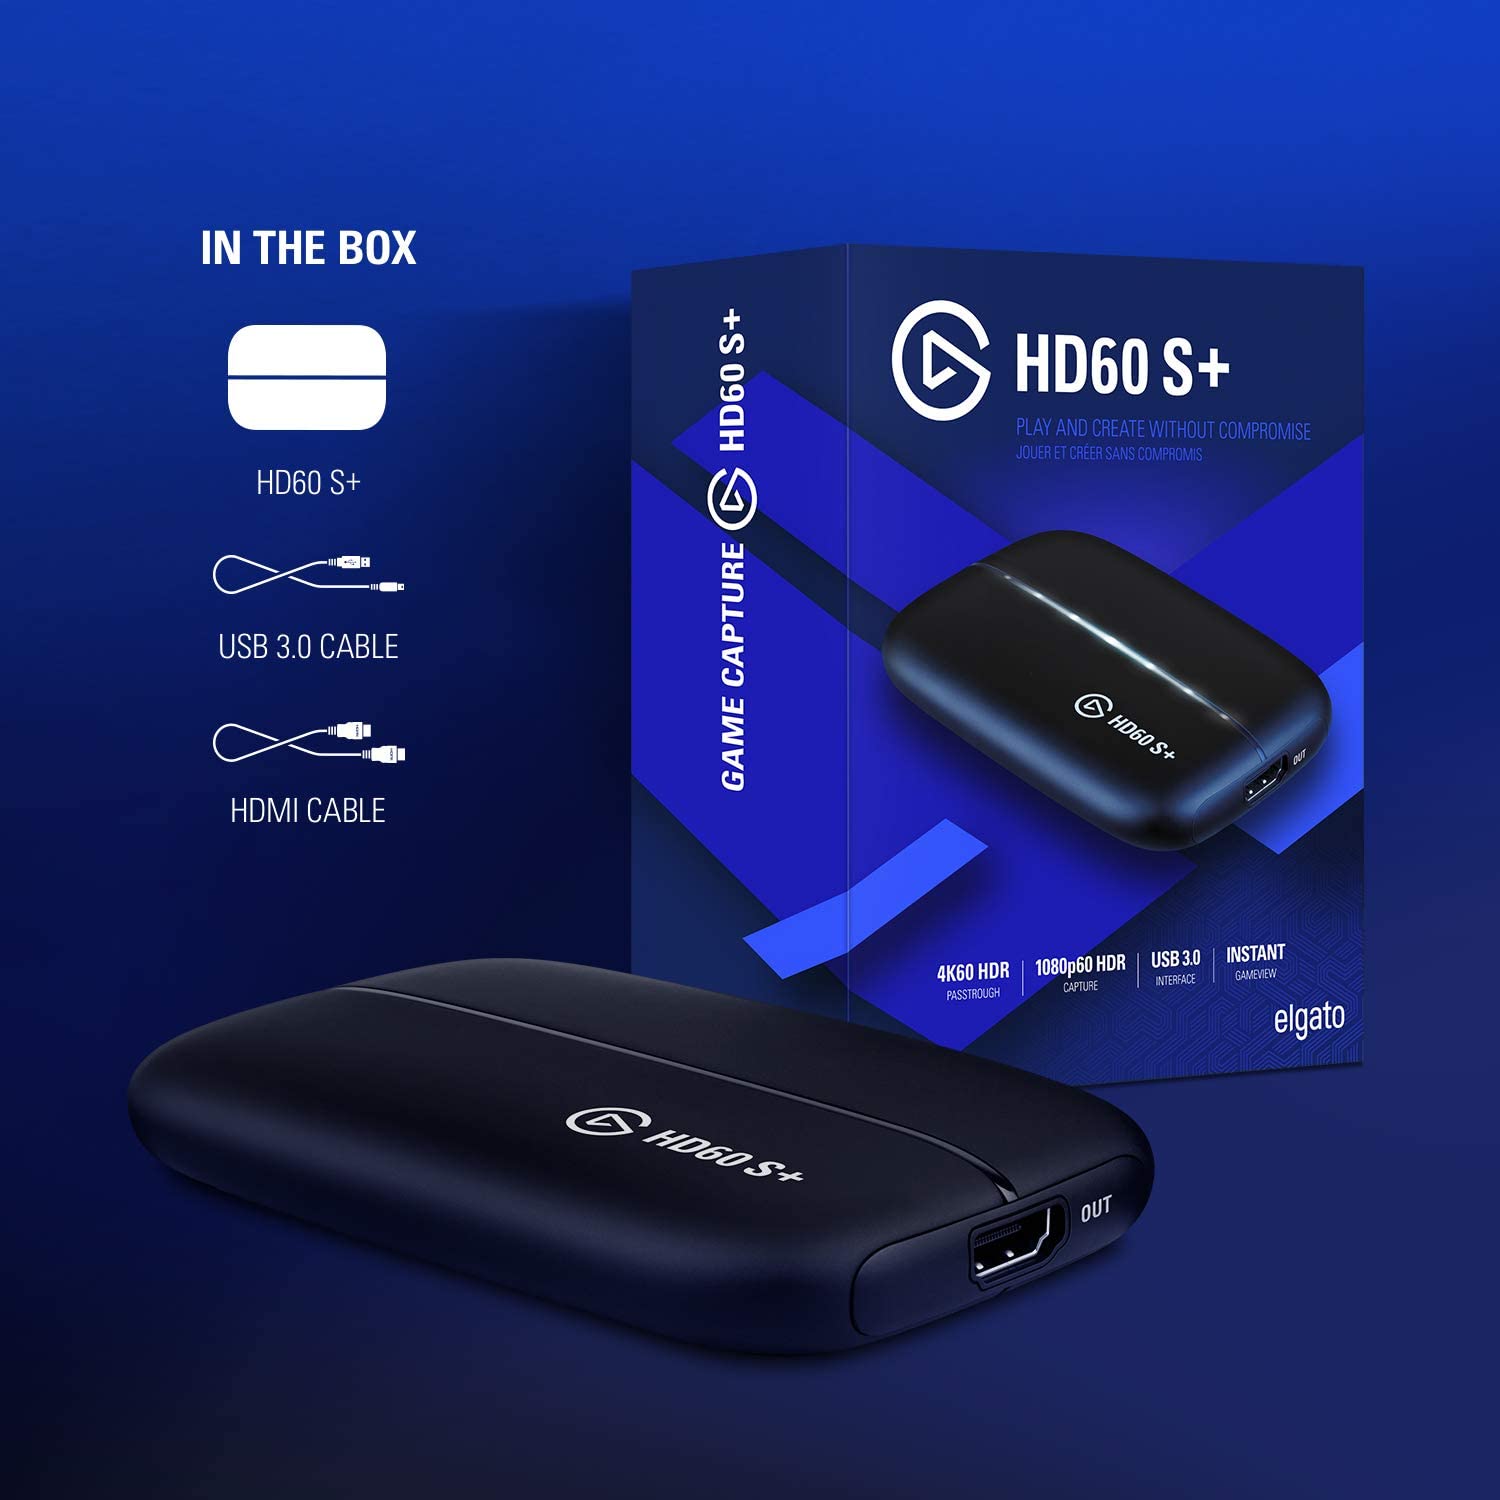 Elgato Game Capture HD60 S+ 1080p60 HDR10 Capture with 4K60 HDR10